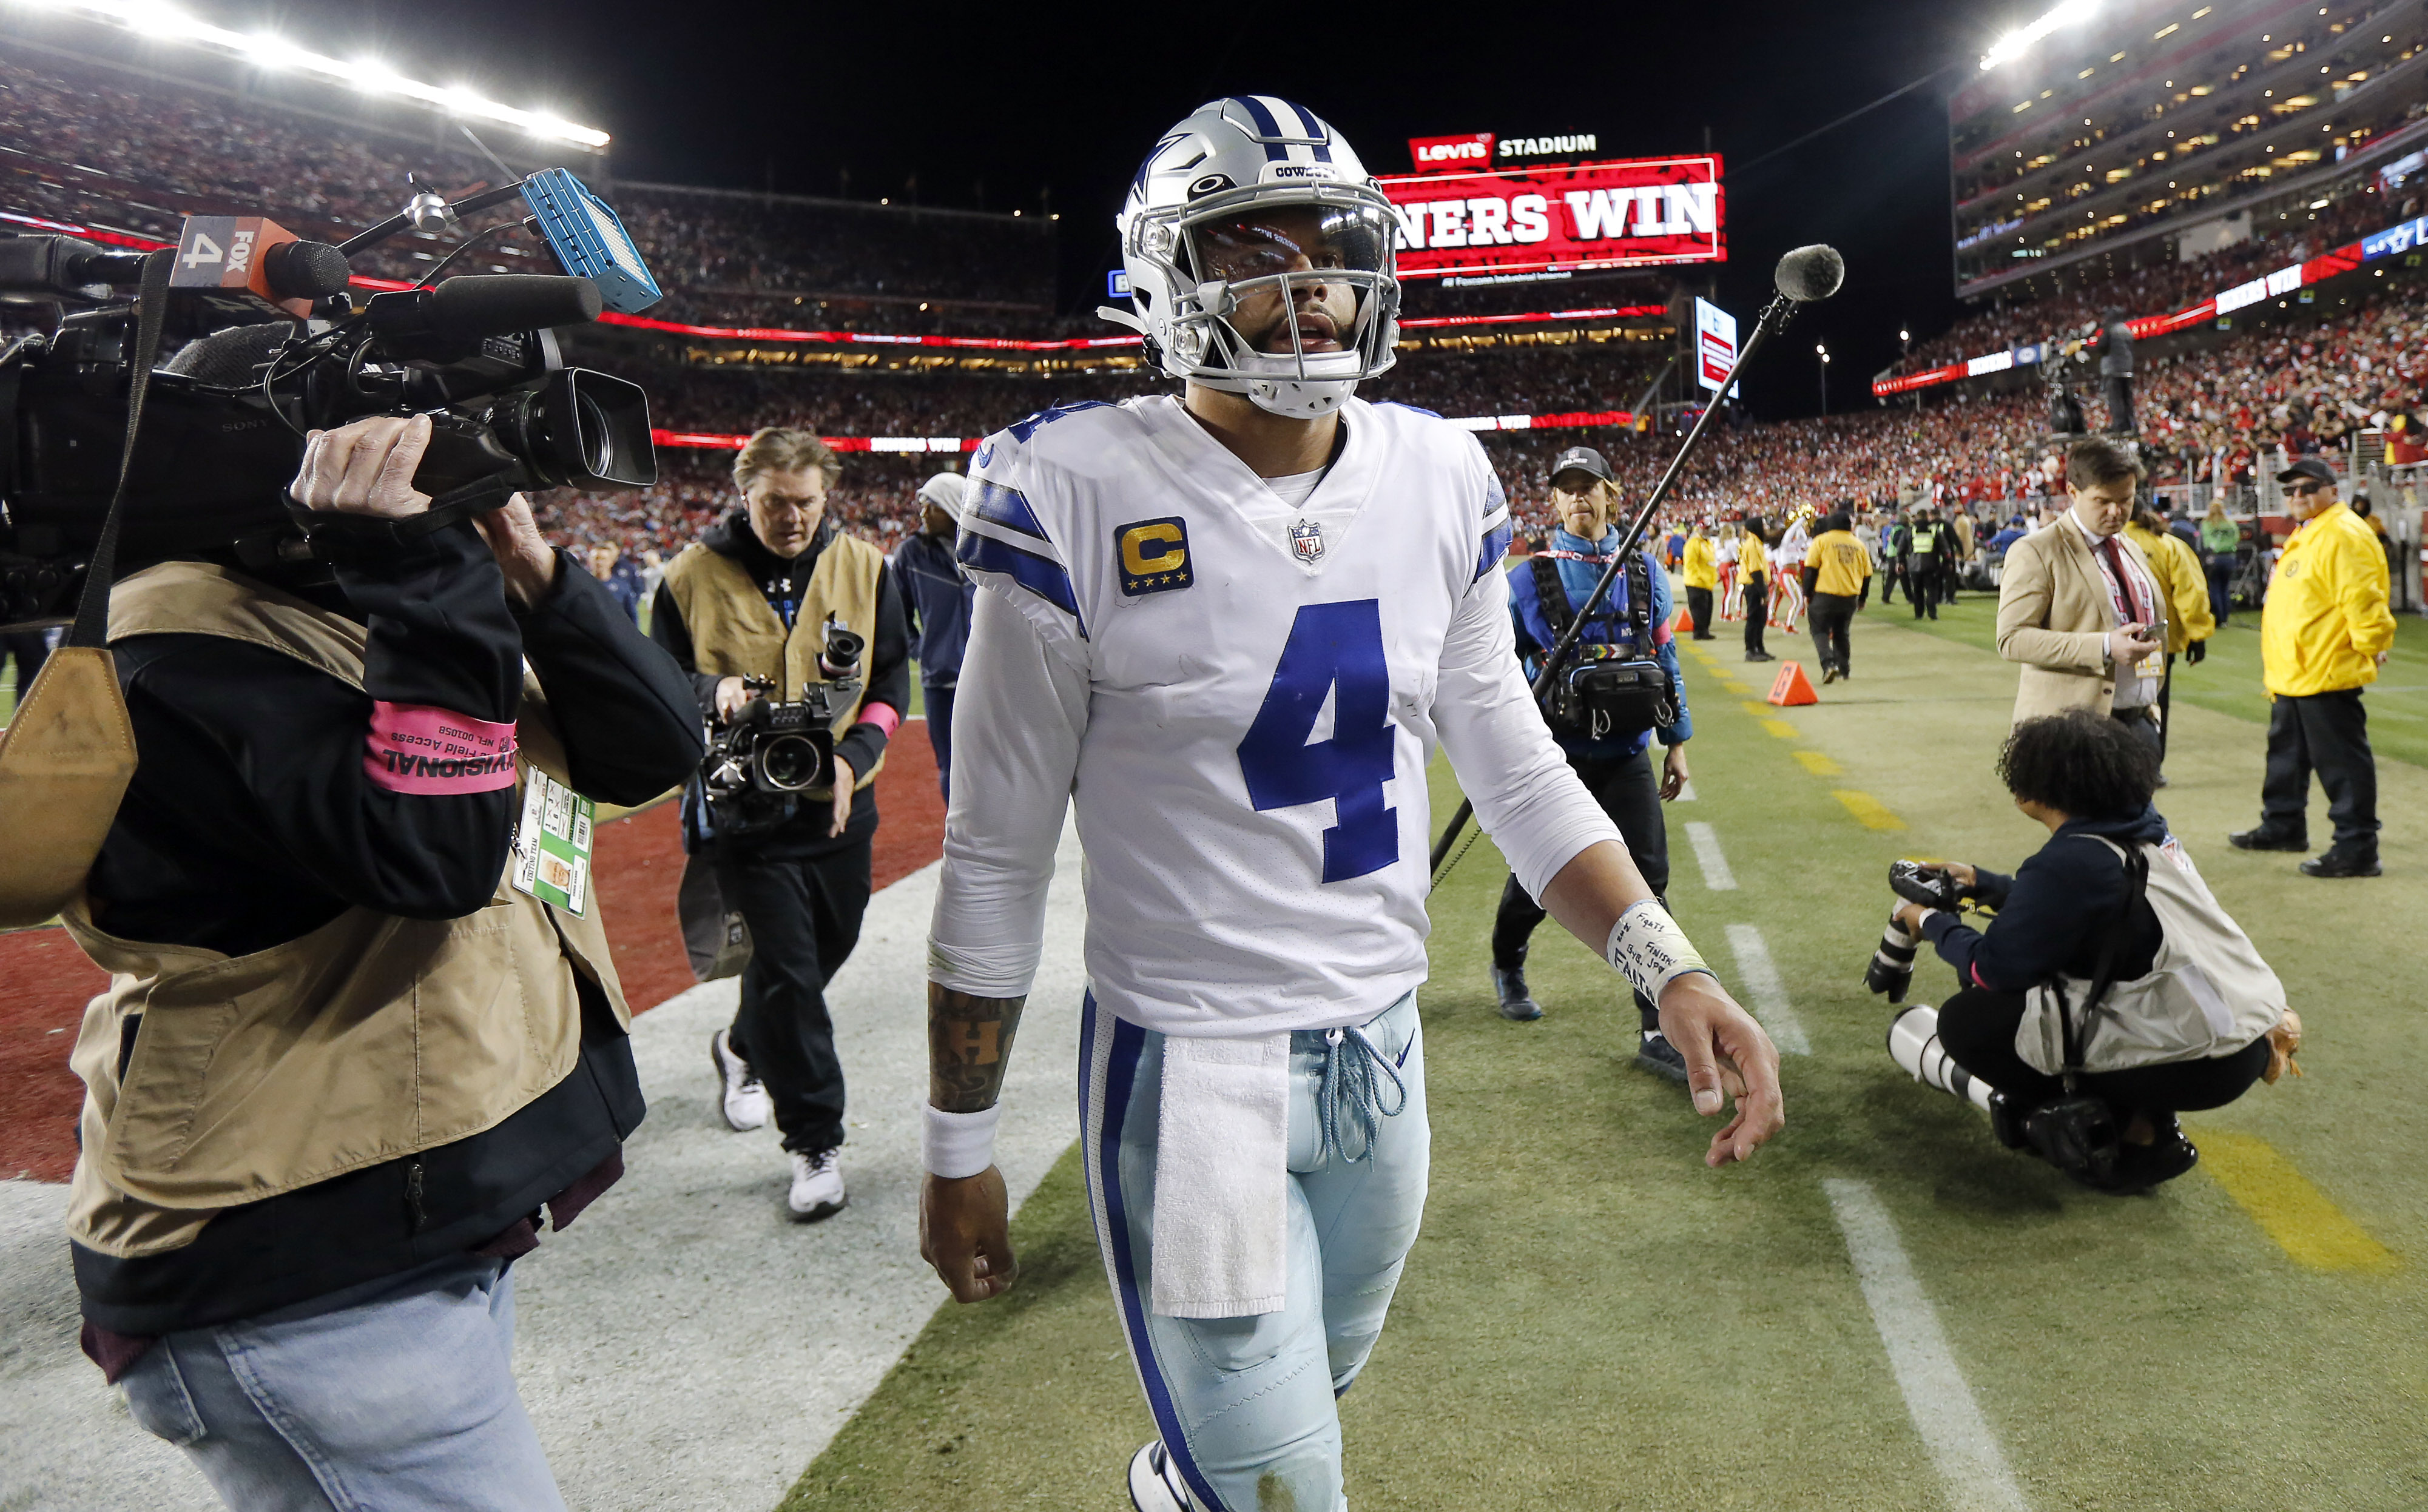 NFL playoffs: Tale-of-the-tape look at 49ers vs. Cowboys